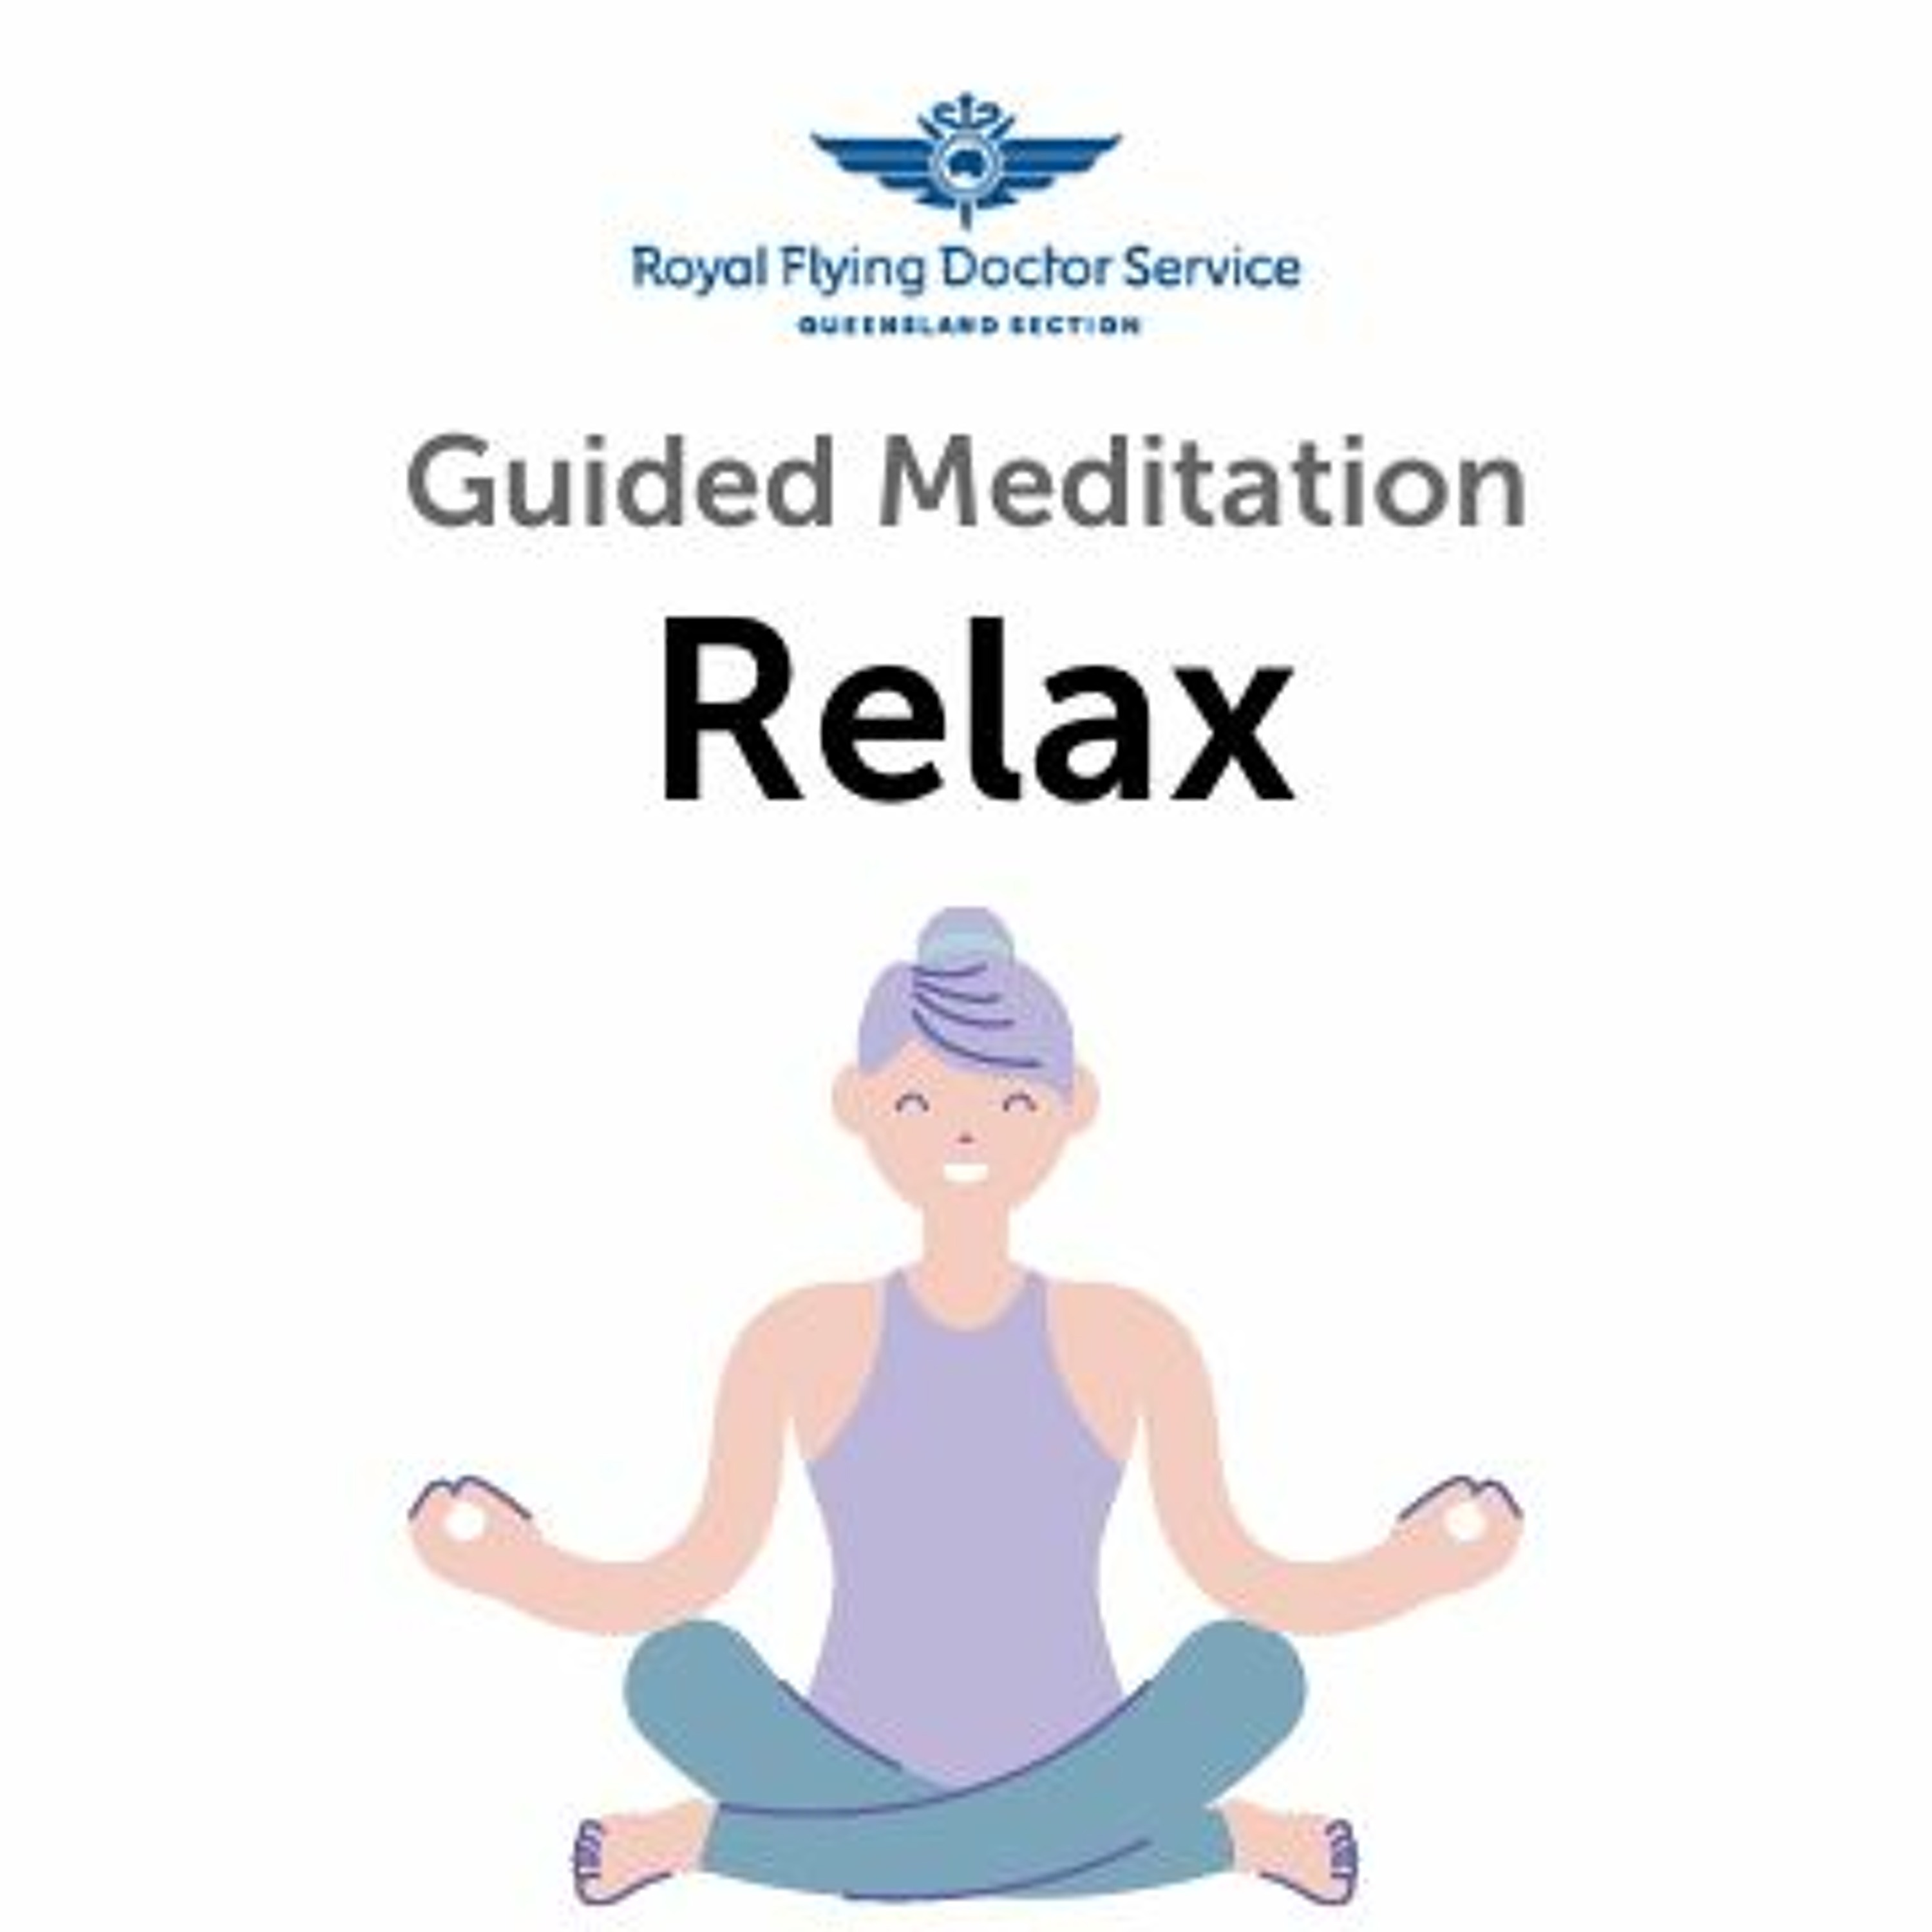 Guided Meditation - Relax